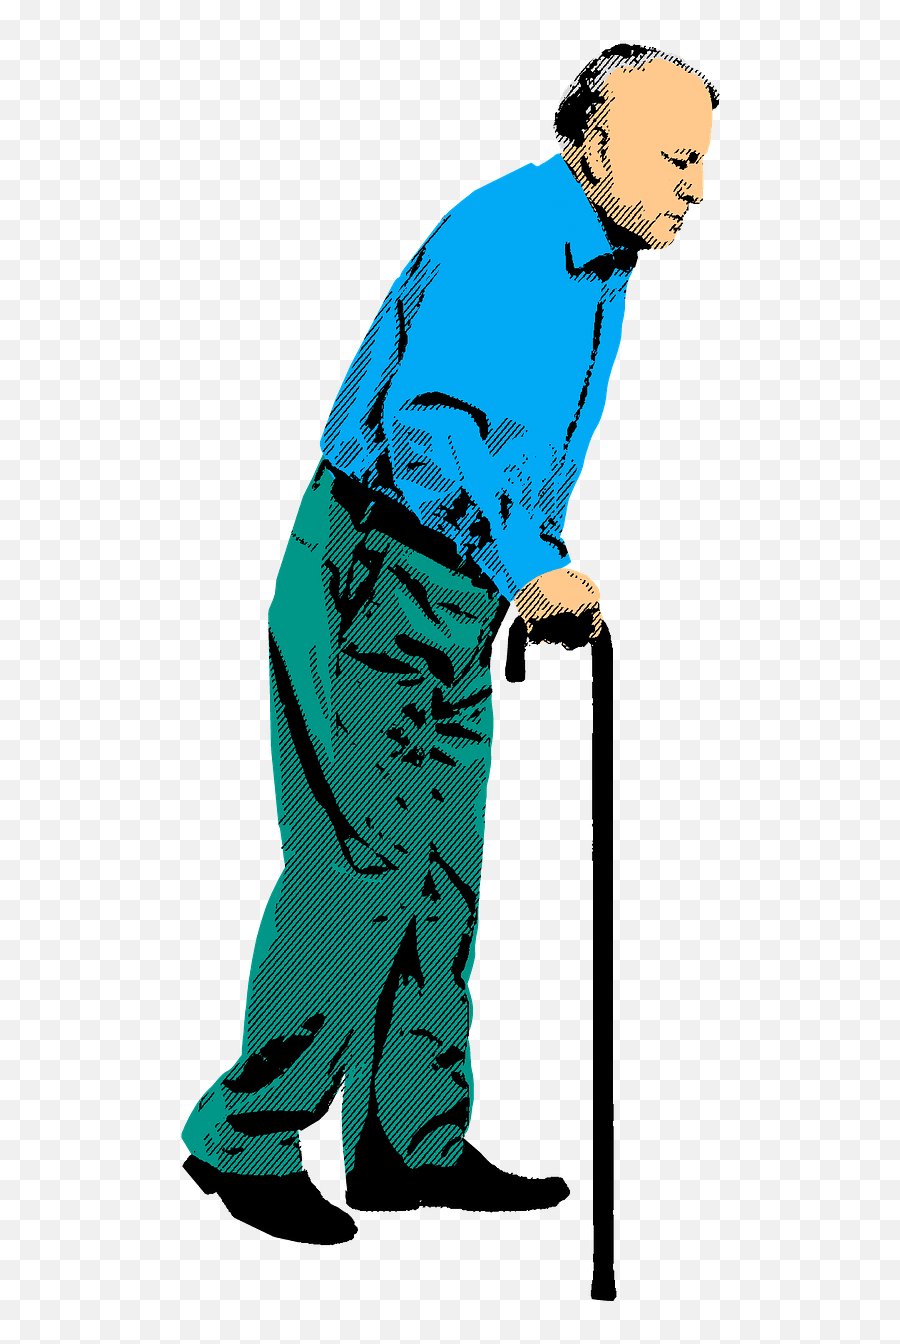 Old Man With A Cane Clipart Free Download Transparent Png - Gammel Mand Med Stok,Old Man Icon